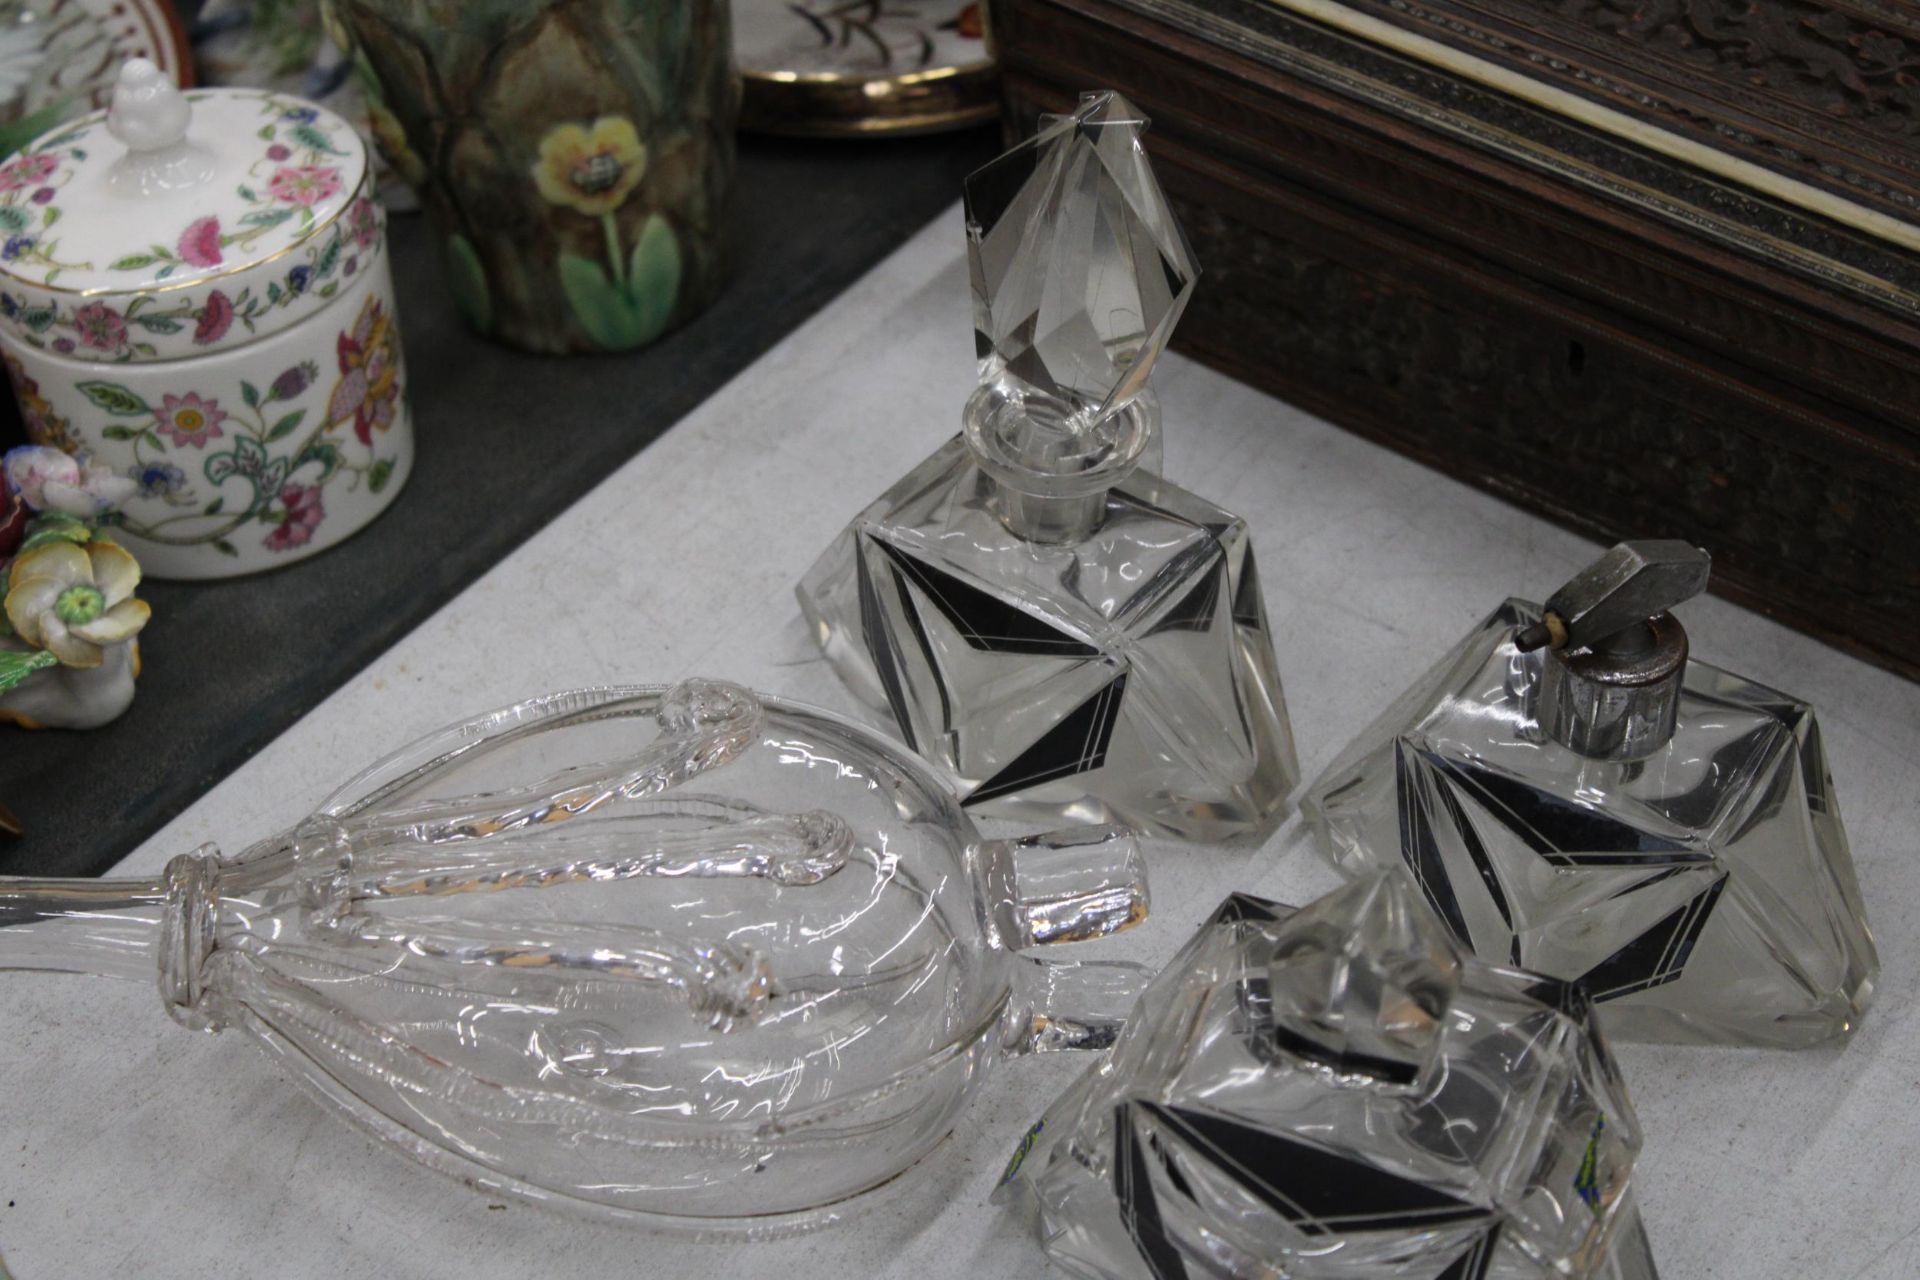 THREE ART DECO STYLE GLASS ITEMS TO INCLUDE SCENT BOTTLES, PLUS A VICTORIAN GLASS FLASK OF BELLOWS - Image 3 of 5